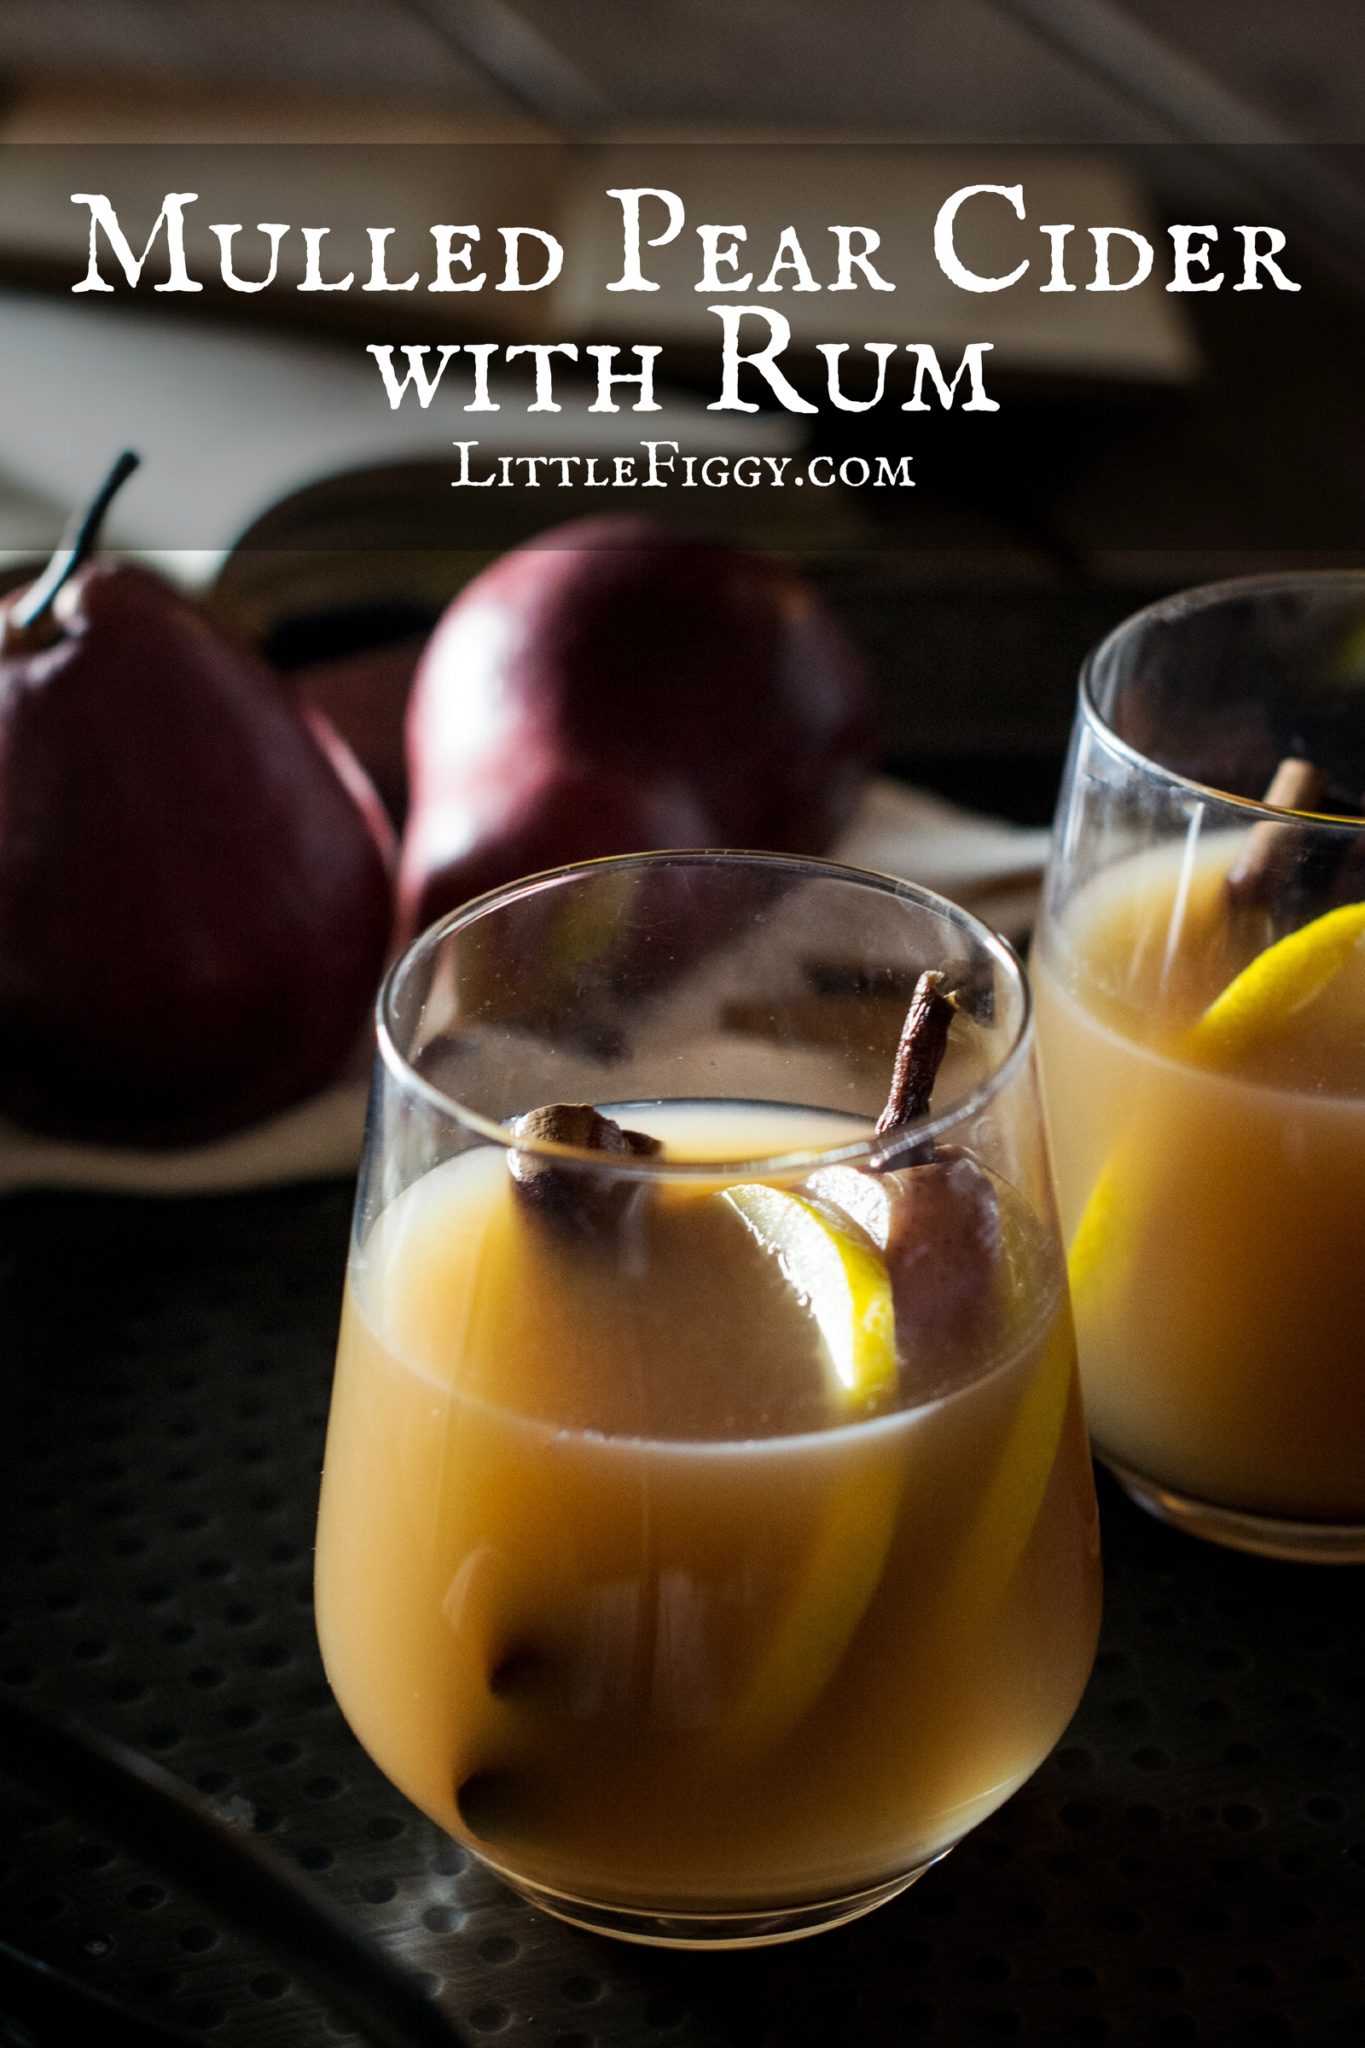 Mulled Pear Cider with Rum